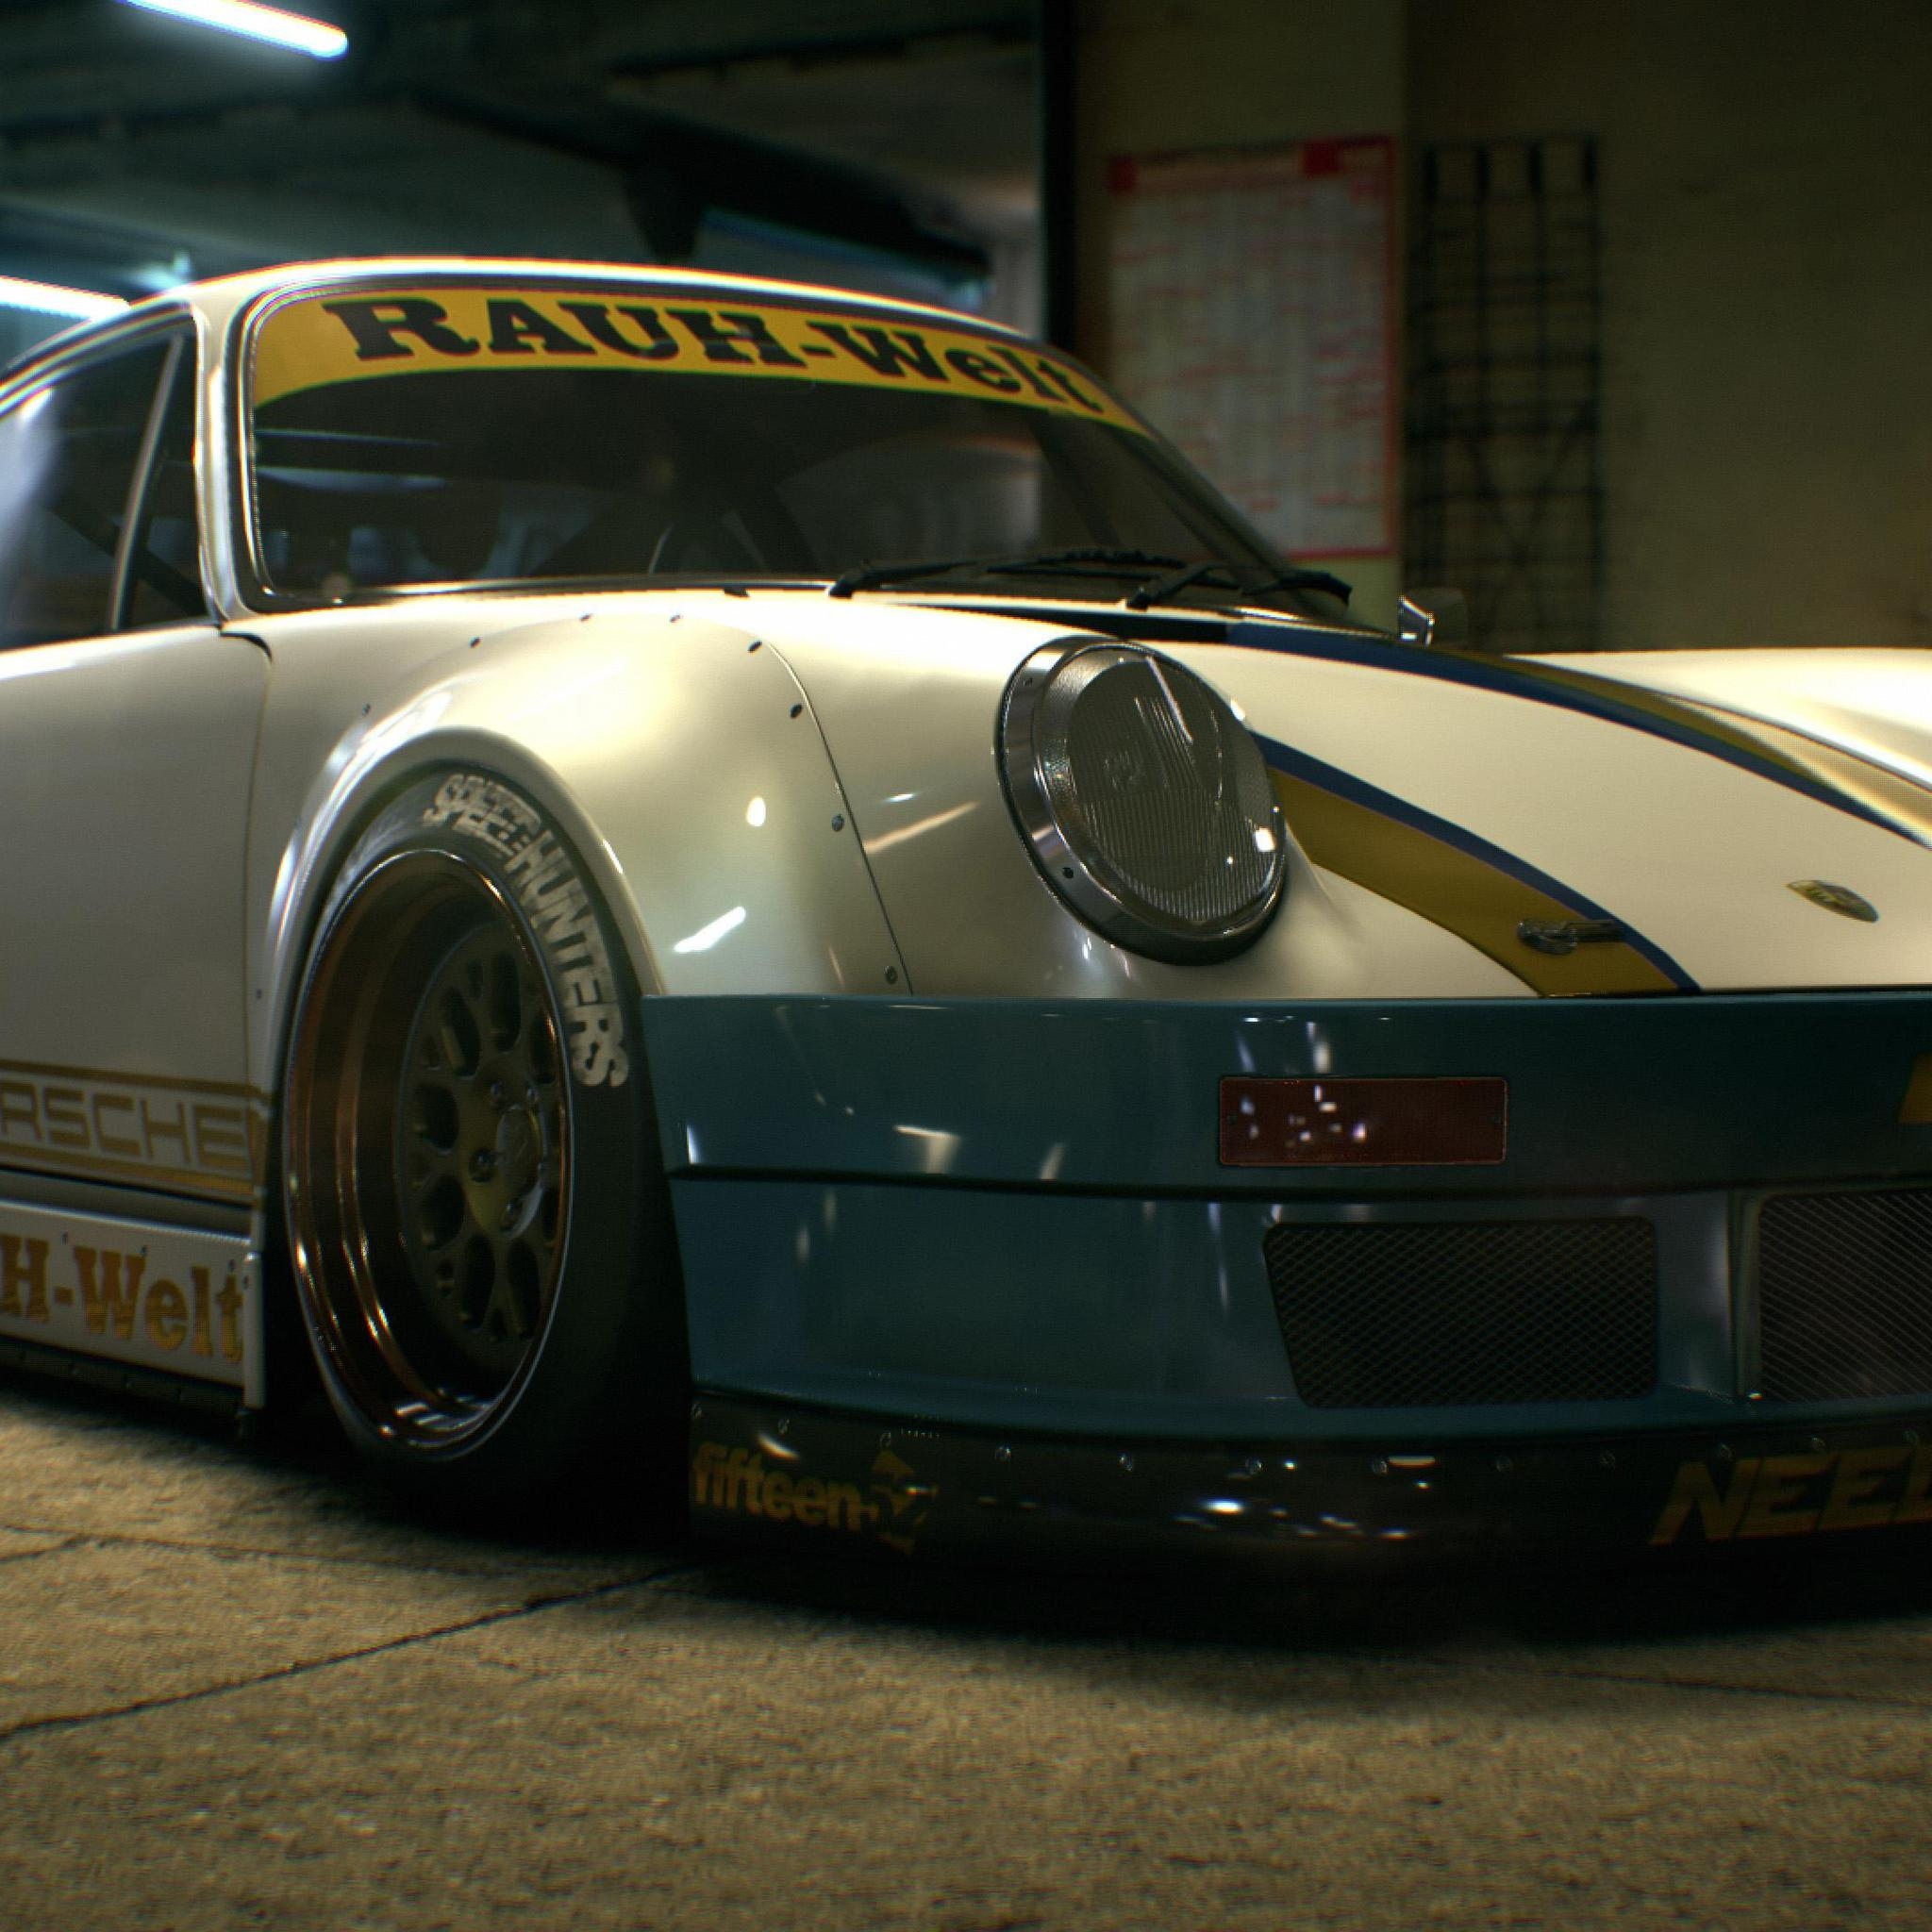 Need For Speed Porsche Rauh-Welt for 2048 x 2048 New iPad resolution